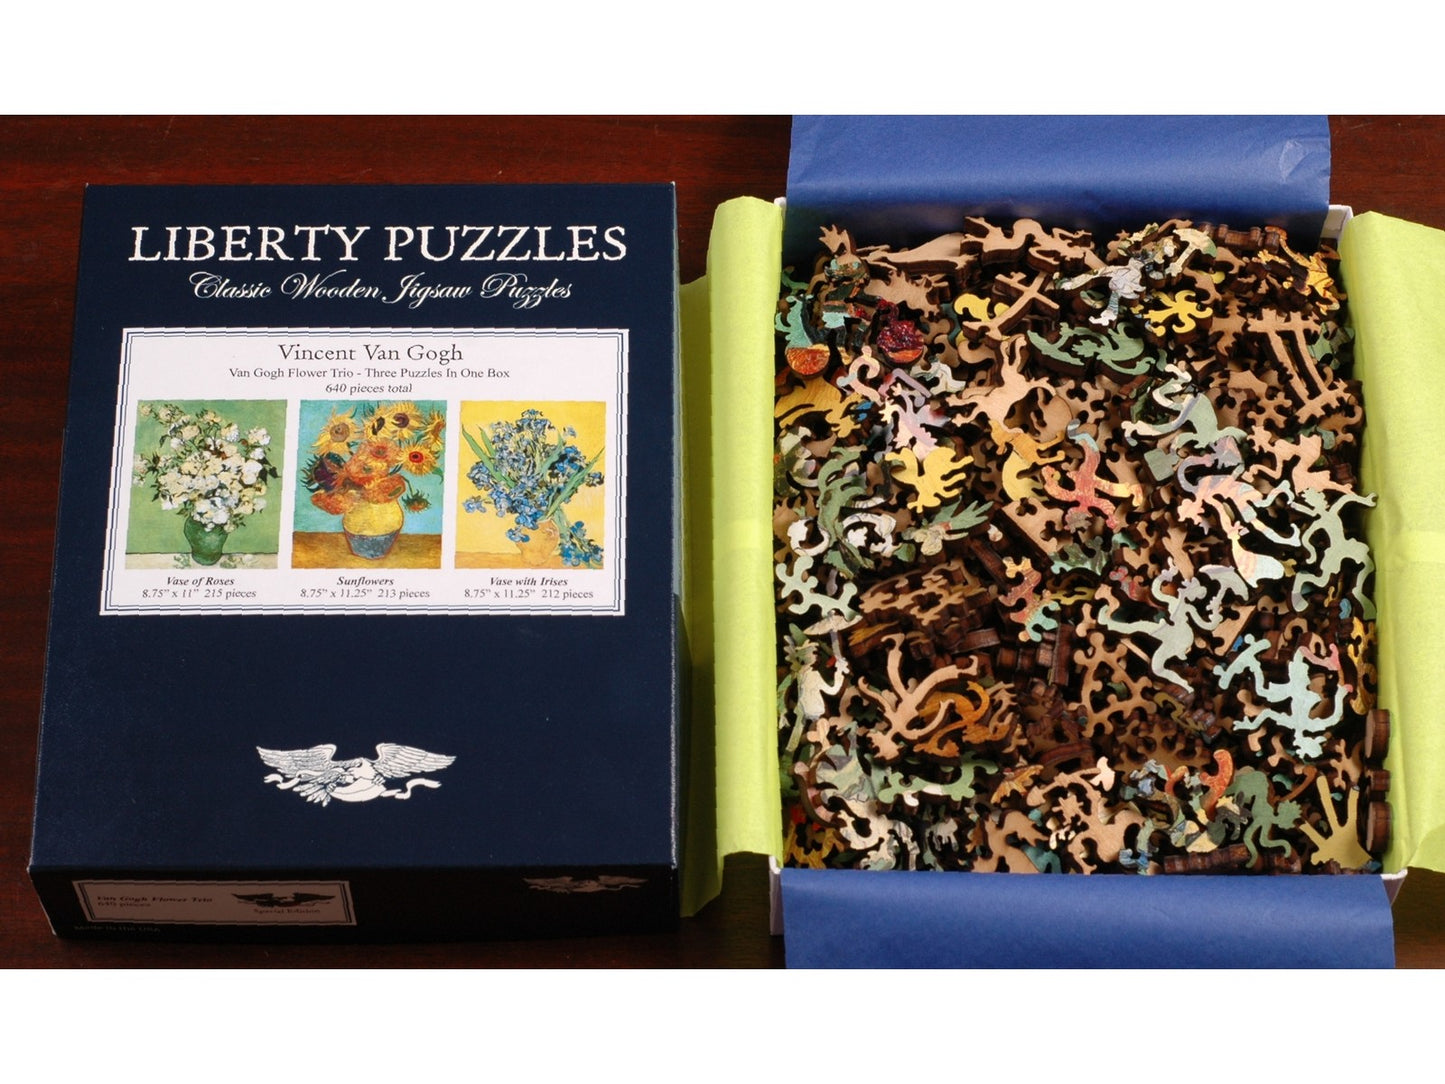 A picture of the puzzle, Van Gogh Flower Trio, taken apart and with its box lid.